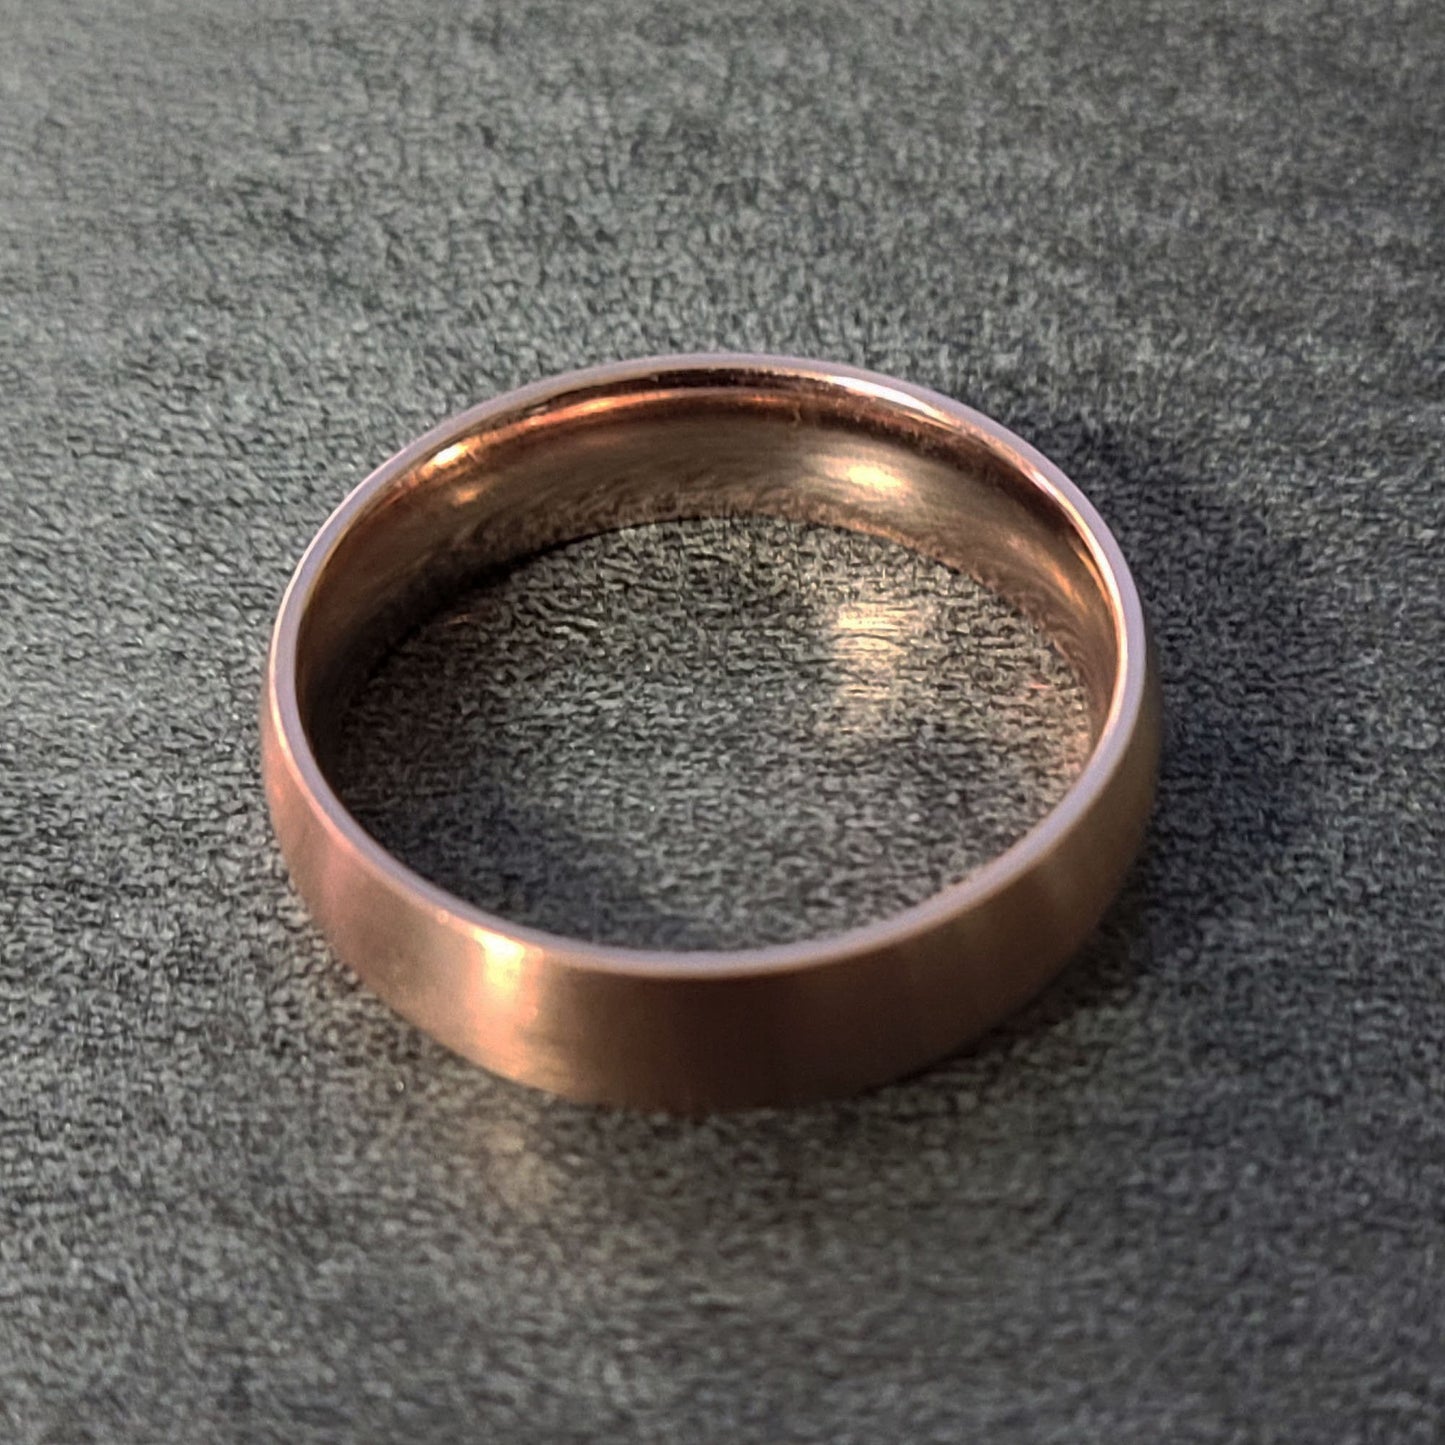 ThinkEngraved wedding Band Personalized Men's Wedding Band - Matte Rose Gold Coated Stainless Steel